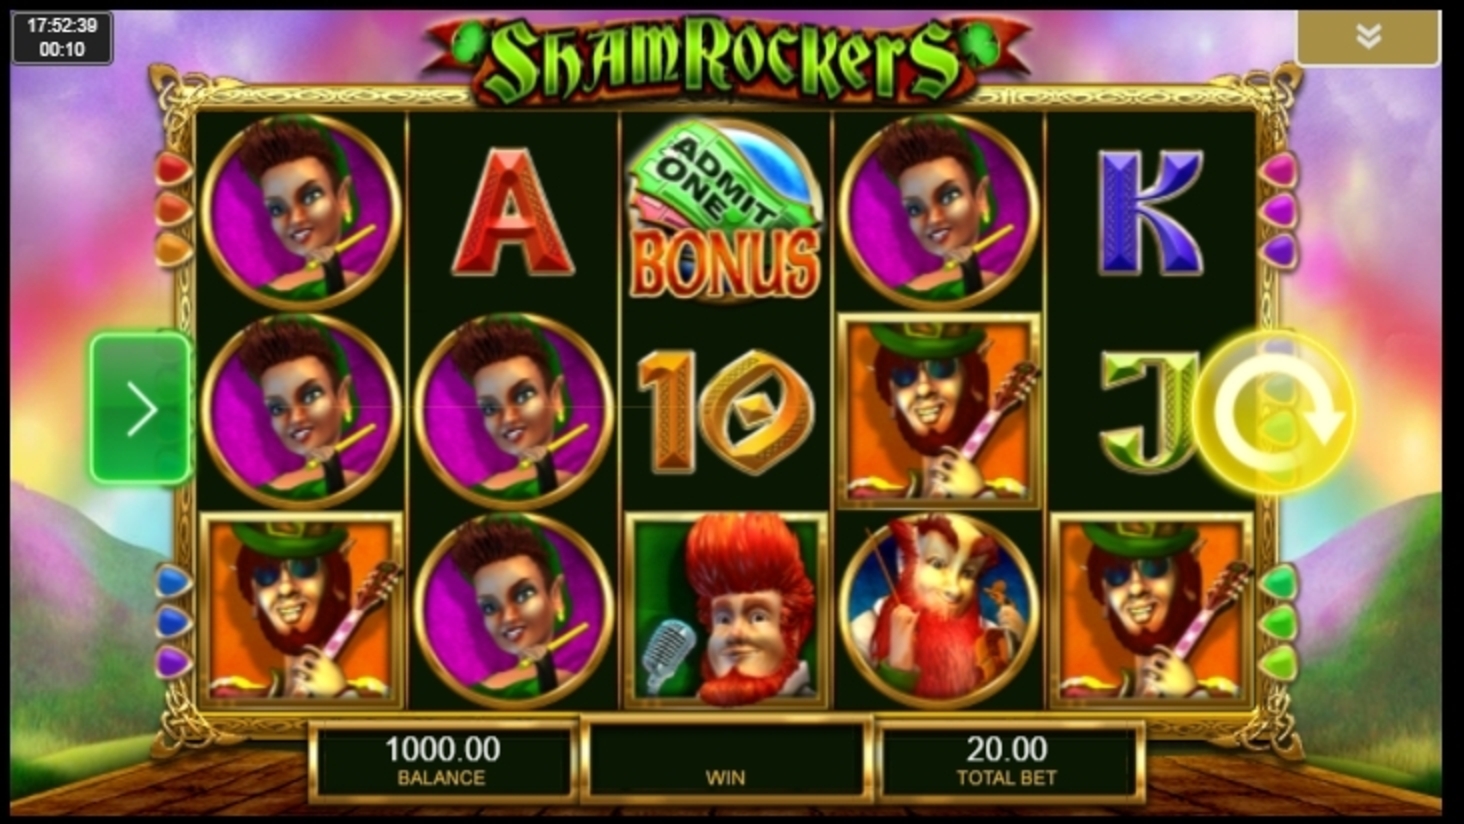 Reels in Shamrockers Eire to Rock Slot Game by IGT